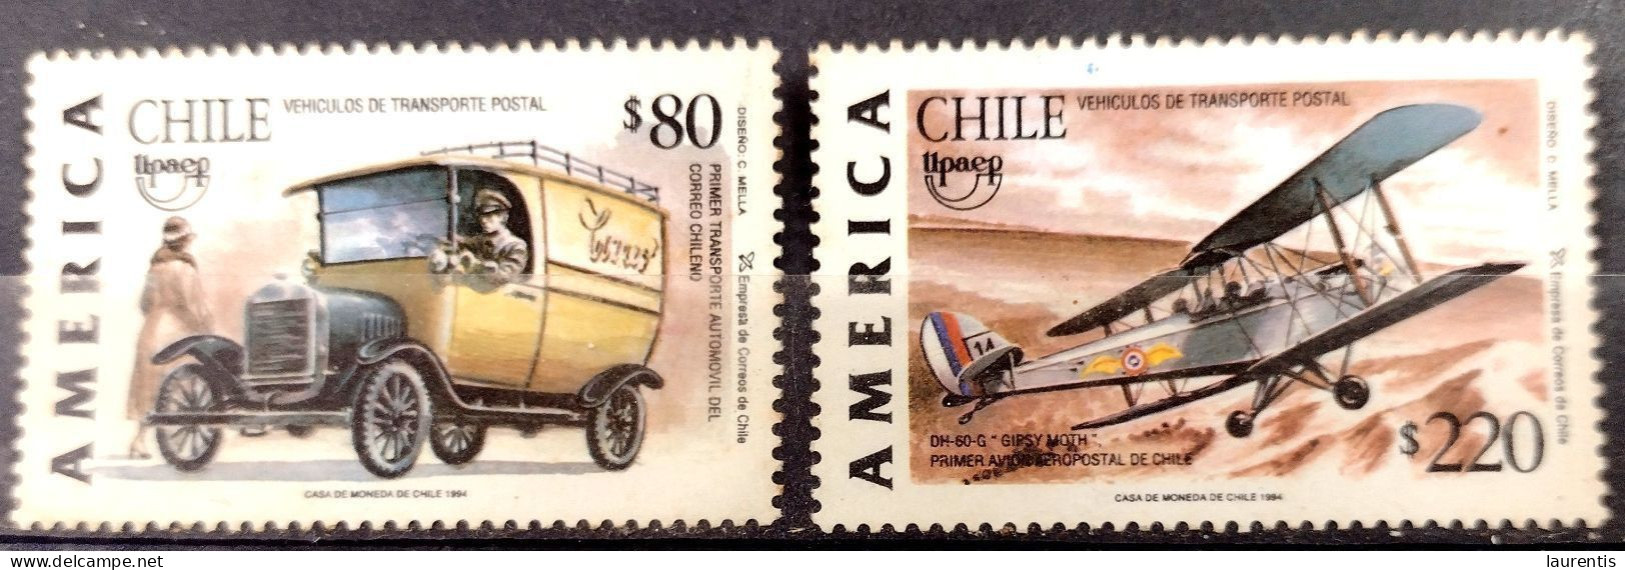 D7467. Trucks - Camions - UPAEP - Post - Chile Yv 1228-29 MNH - 1,25 (4) - Trucks